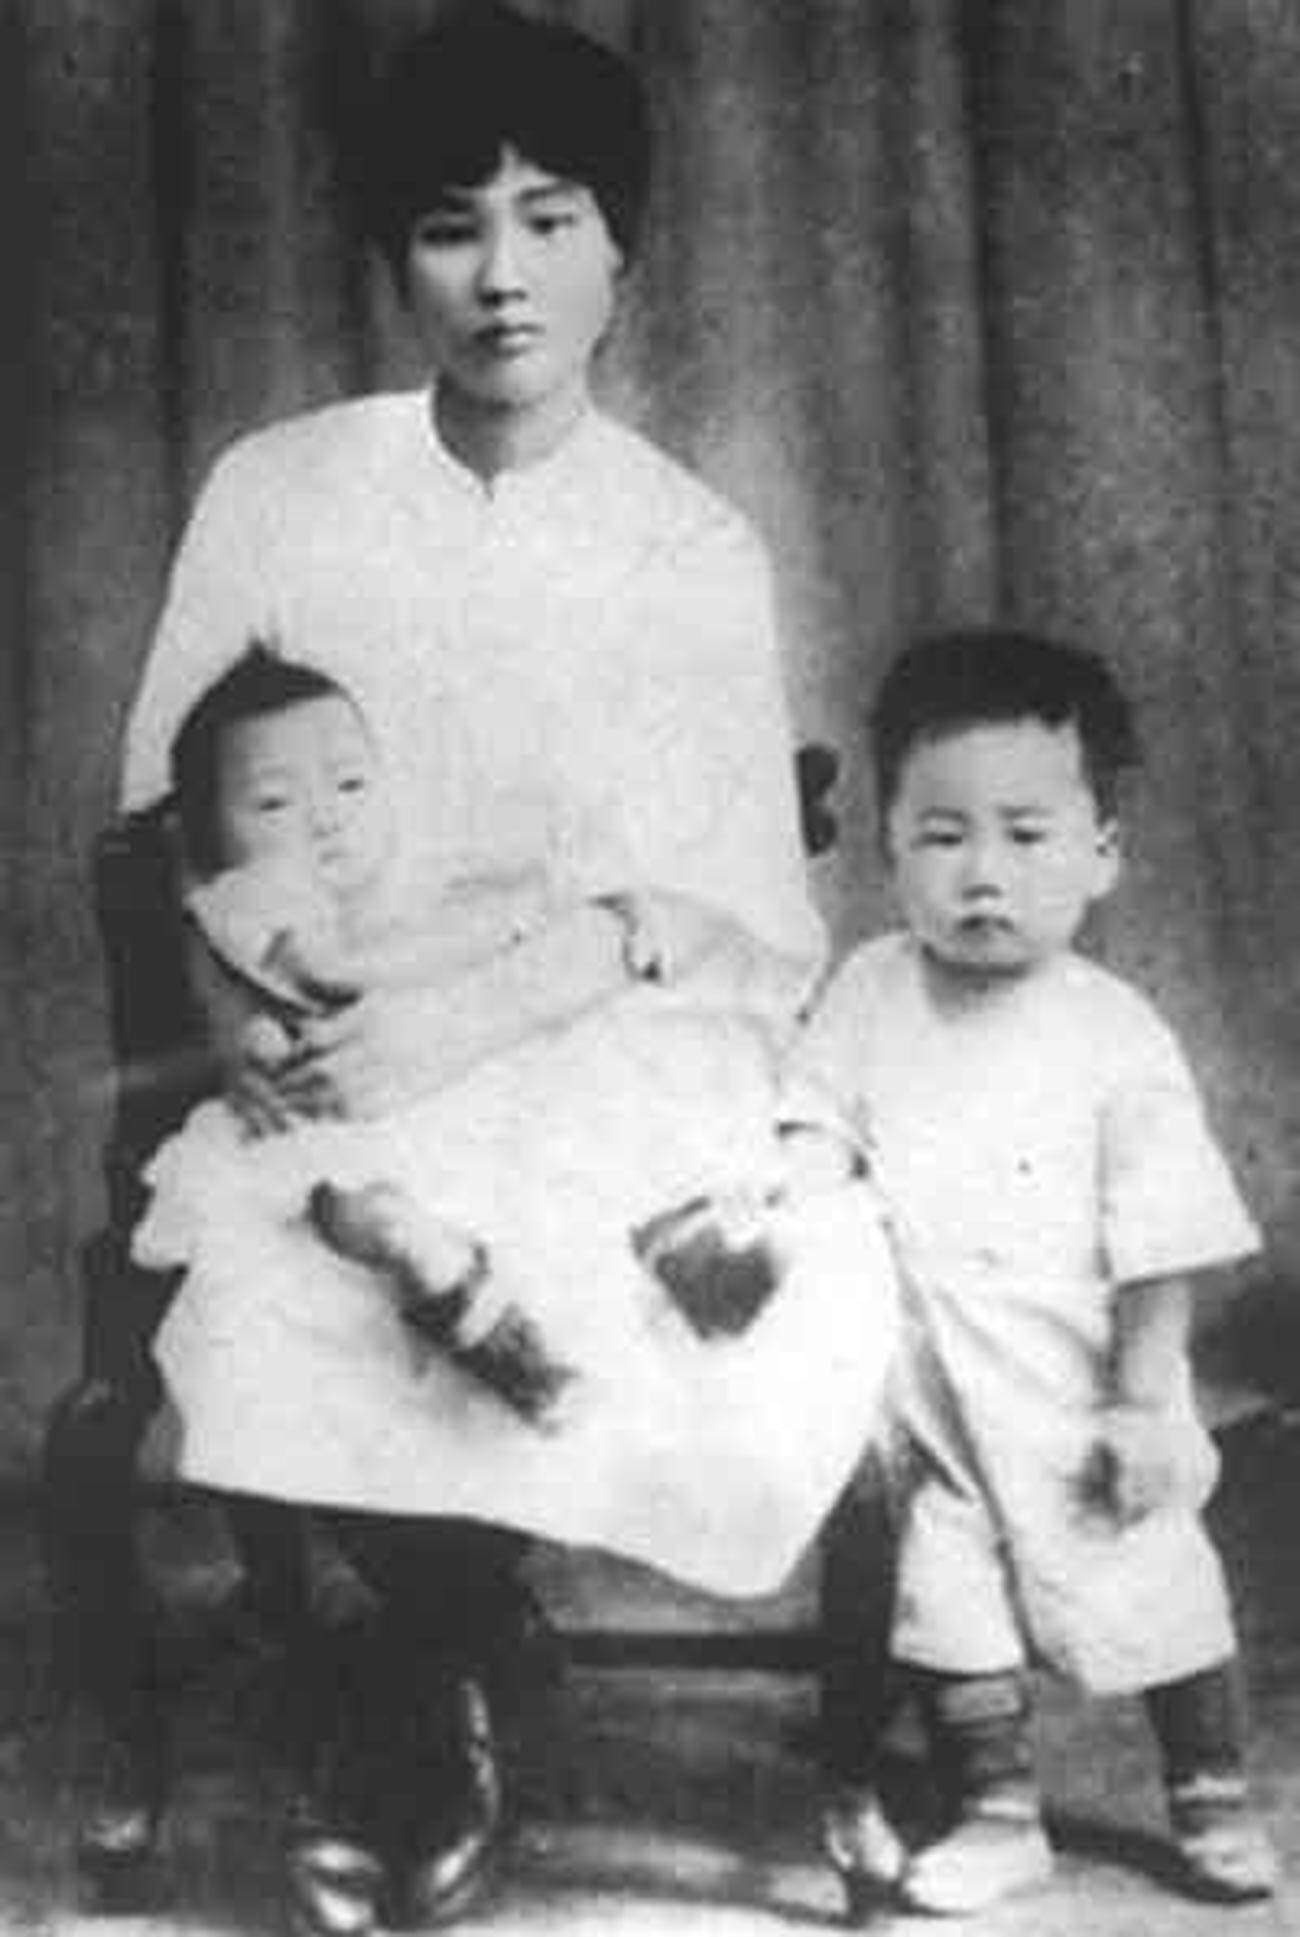 Yang Kaihui y sus hijos Mao Anqin y Mao Anying.
